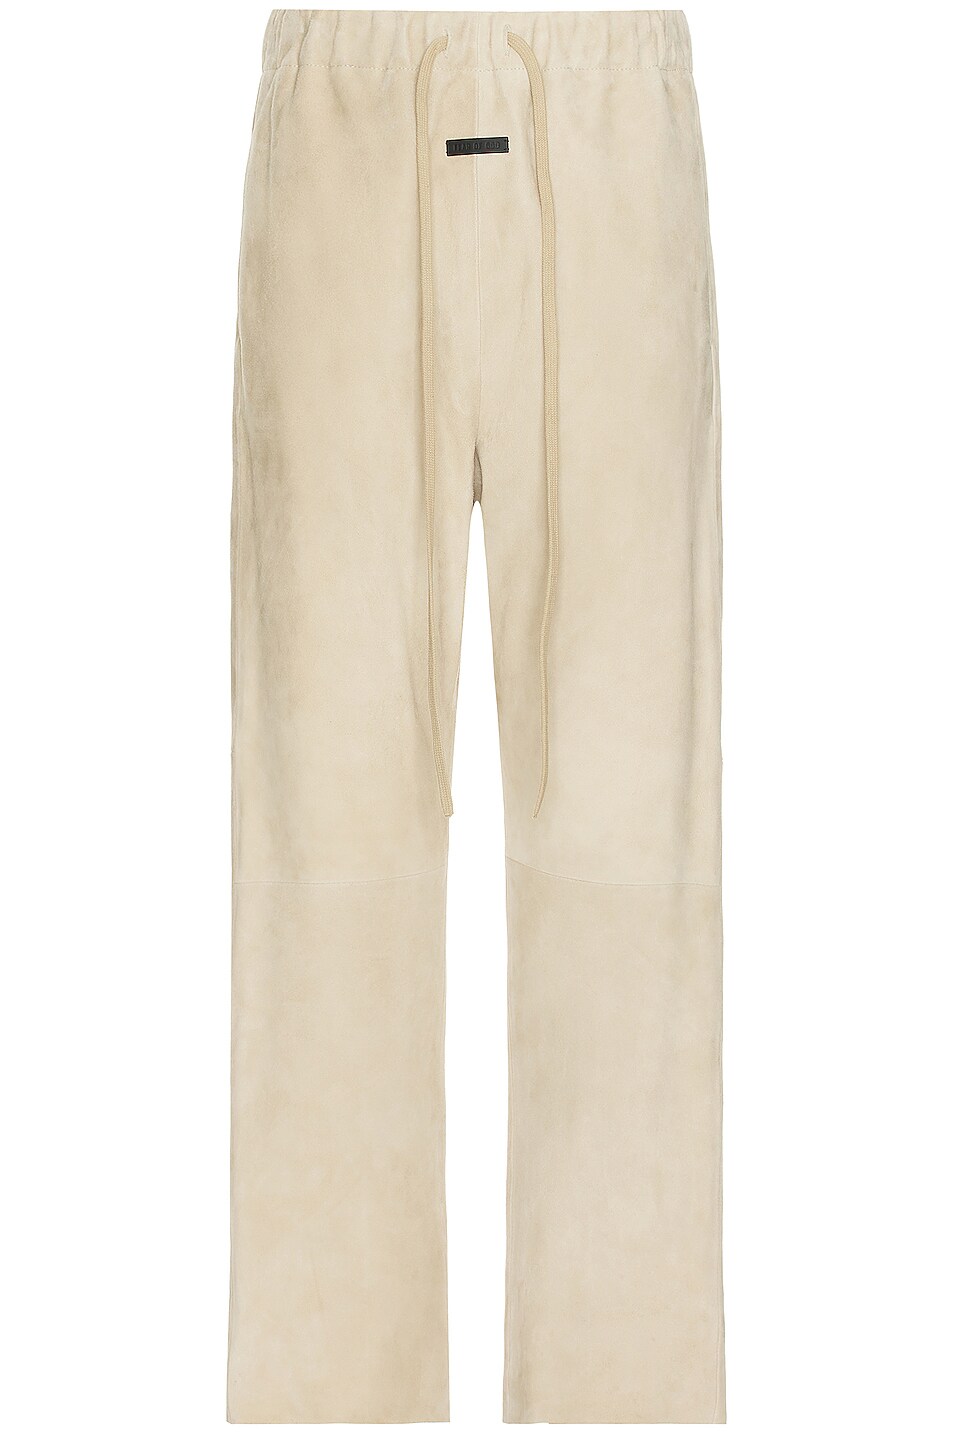 Image 1 of Fear of God Eternal Suede Relaxed Pant in Dusty Beige